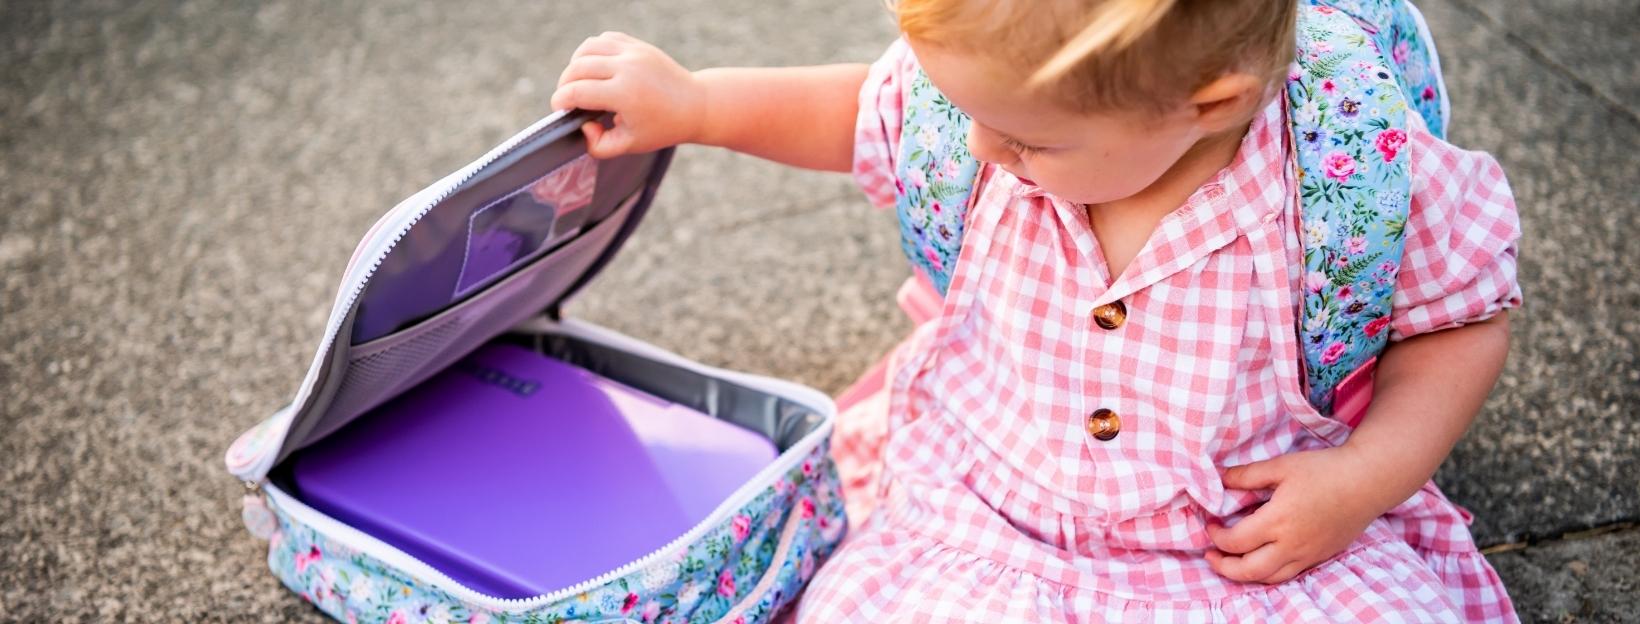 TODDLER OPENING FLORAL LUNCH BAG WITH PURPLE LUNCH BOX